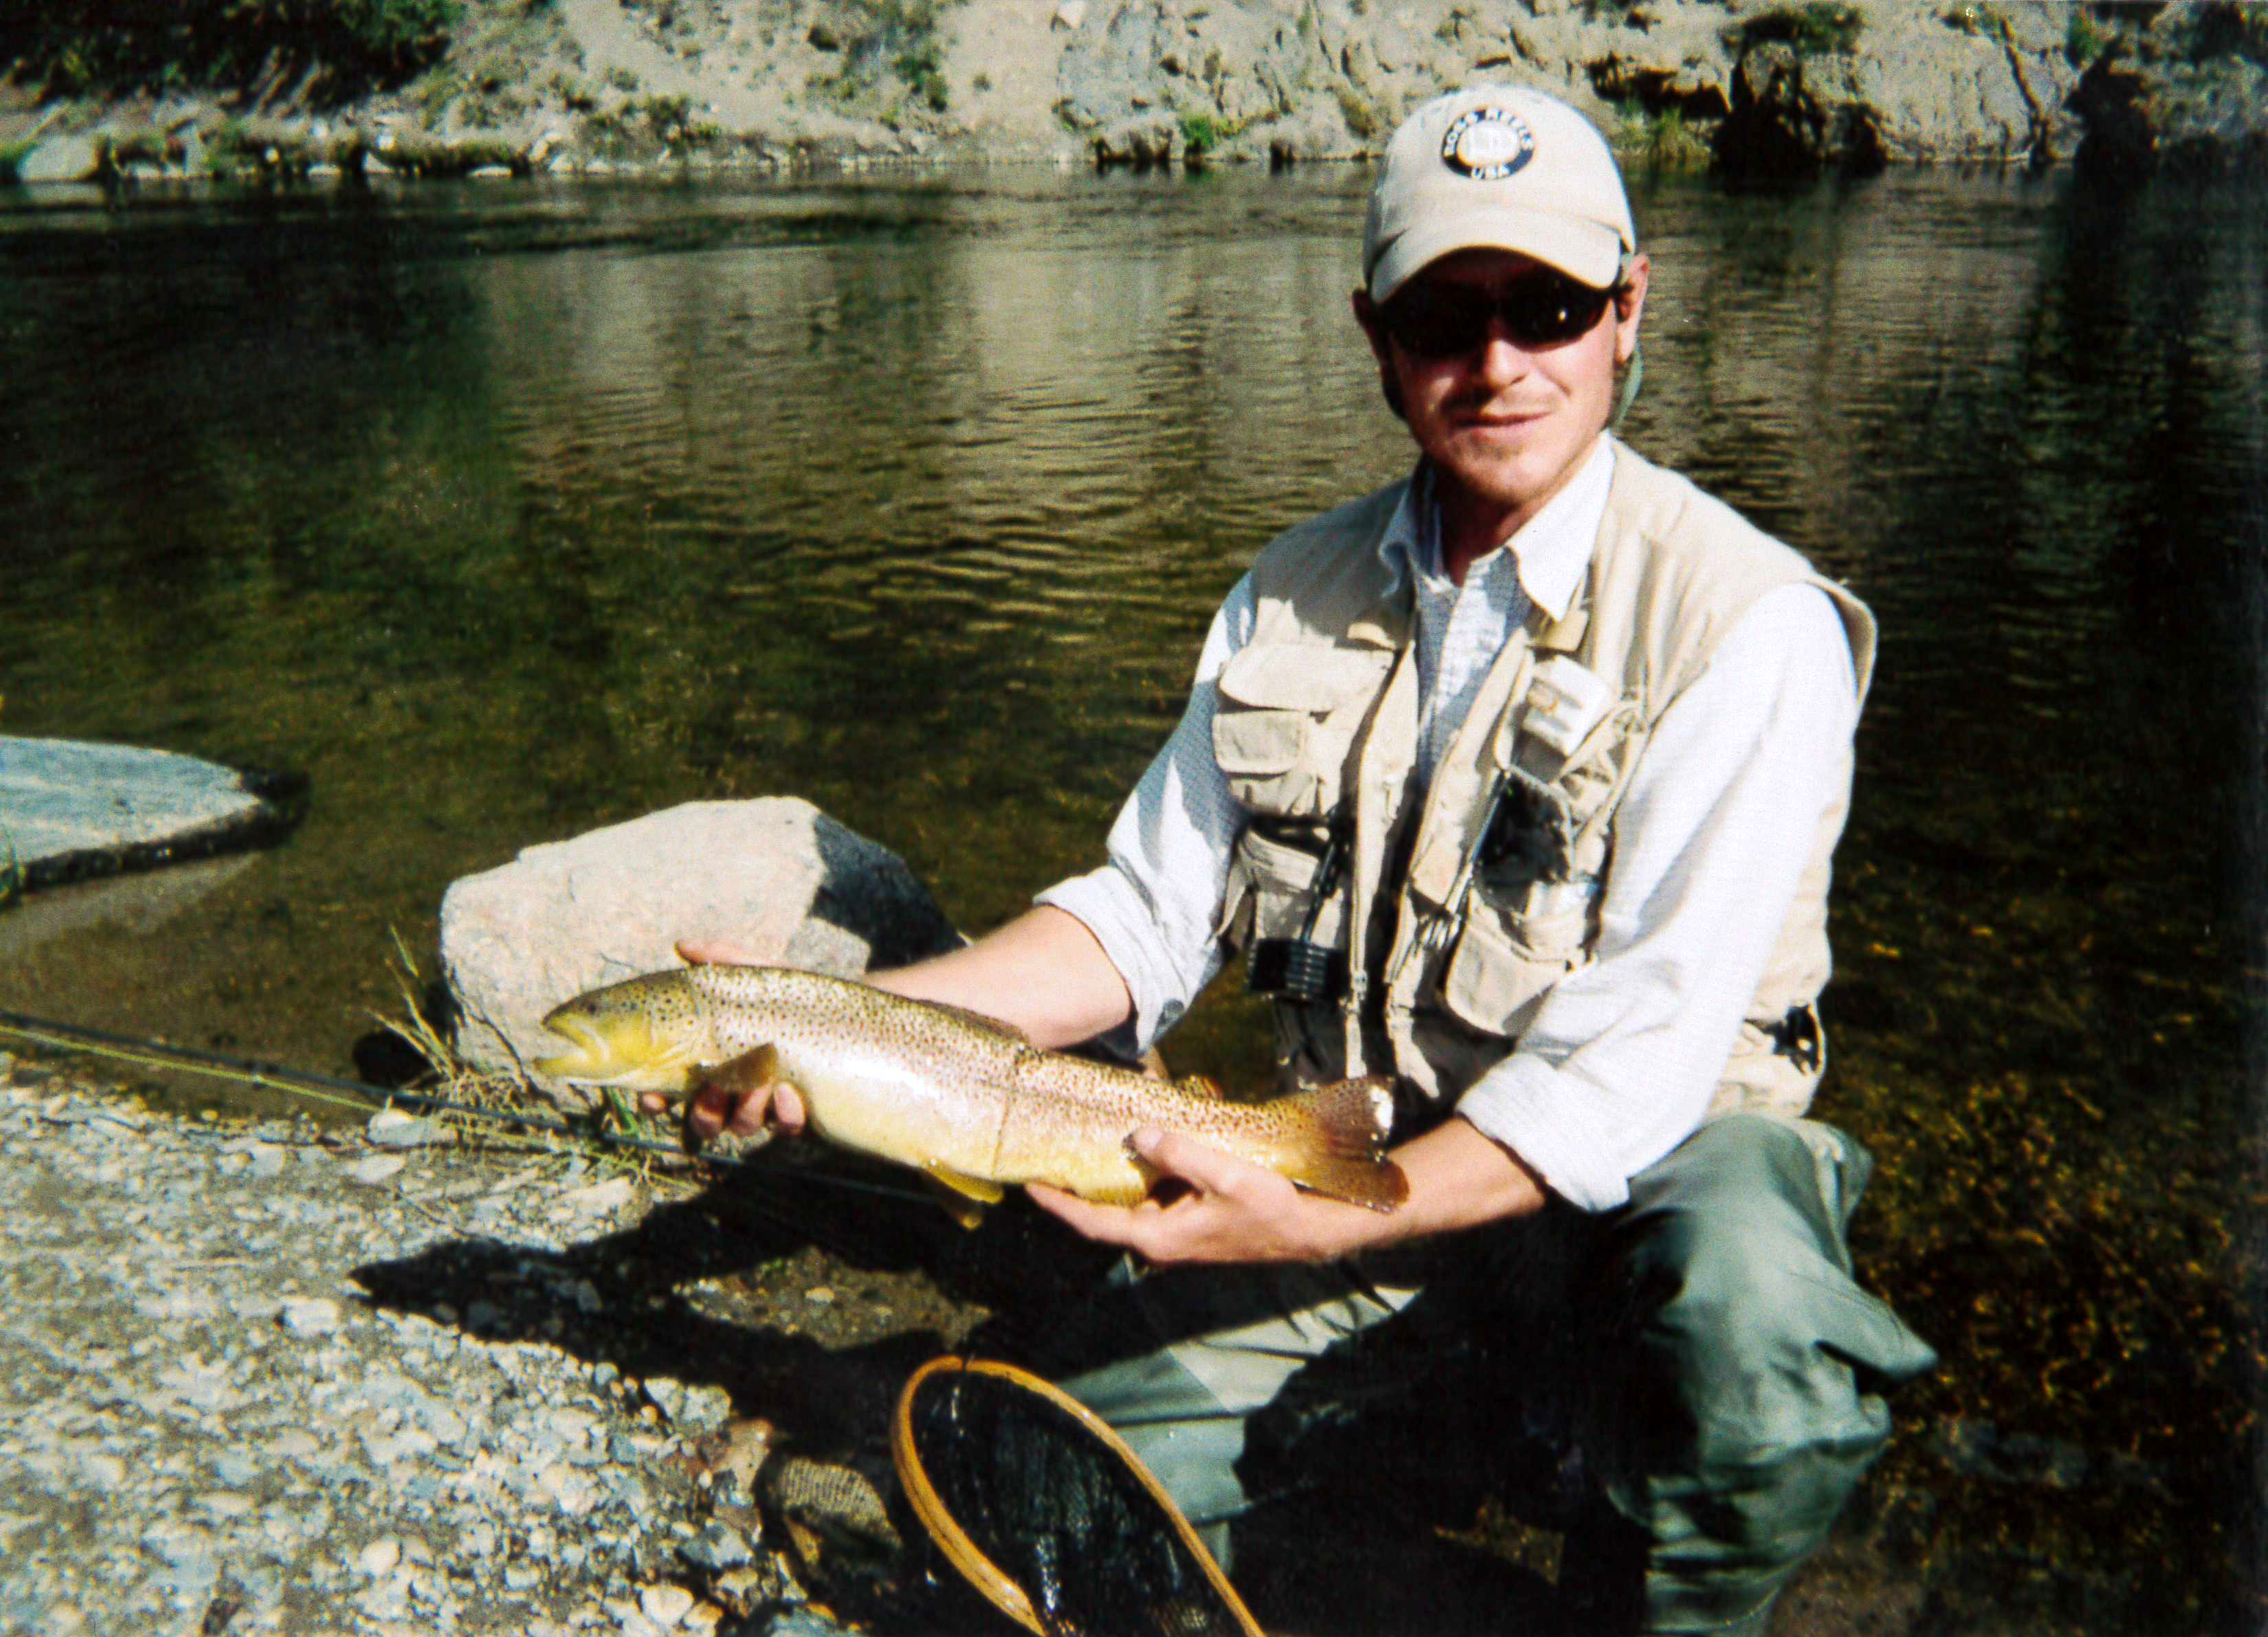 Bypass flows released from Strontia Springs Reservoir located at the top of Waterton Canyon keep the river at optimum levels, sustaining a healthy trout fishery for anglers like the author’s brother Jason Kirk, pictured here.